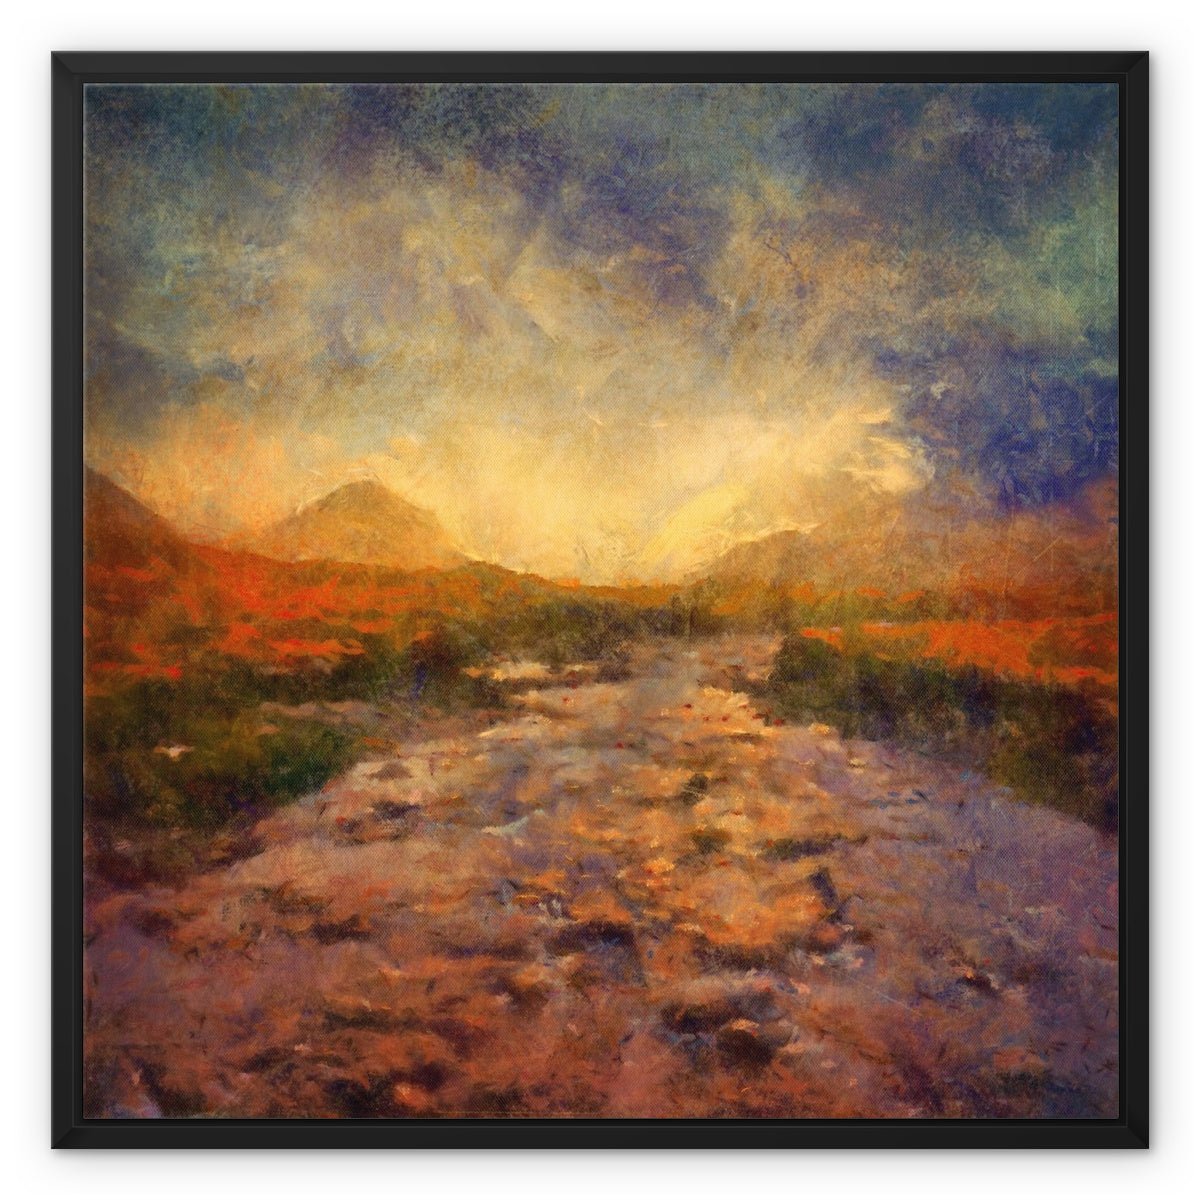 A Brooding Sligachan Skye Painting | Framed Canvas From Scotland-Floating Framed Canvas Prints-Skye Art Gallery-24"x24"-Black Frame-Paintings, Prints, Homeware, Art Gifts From Scotland By Scottish Artist Kevin Hunter